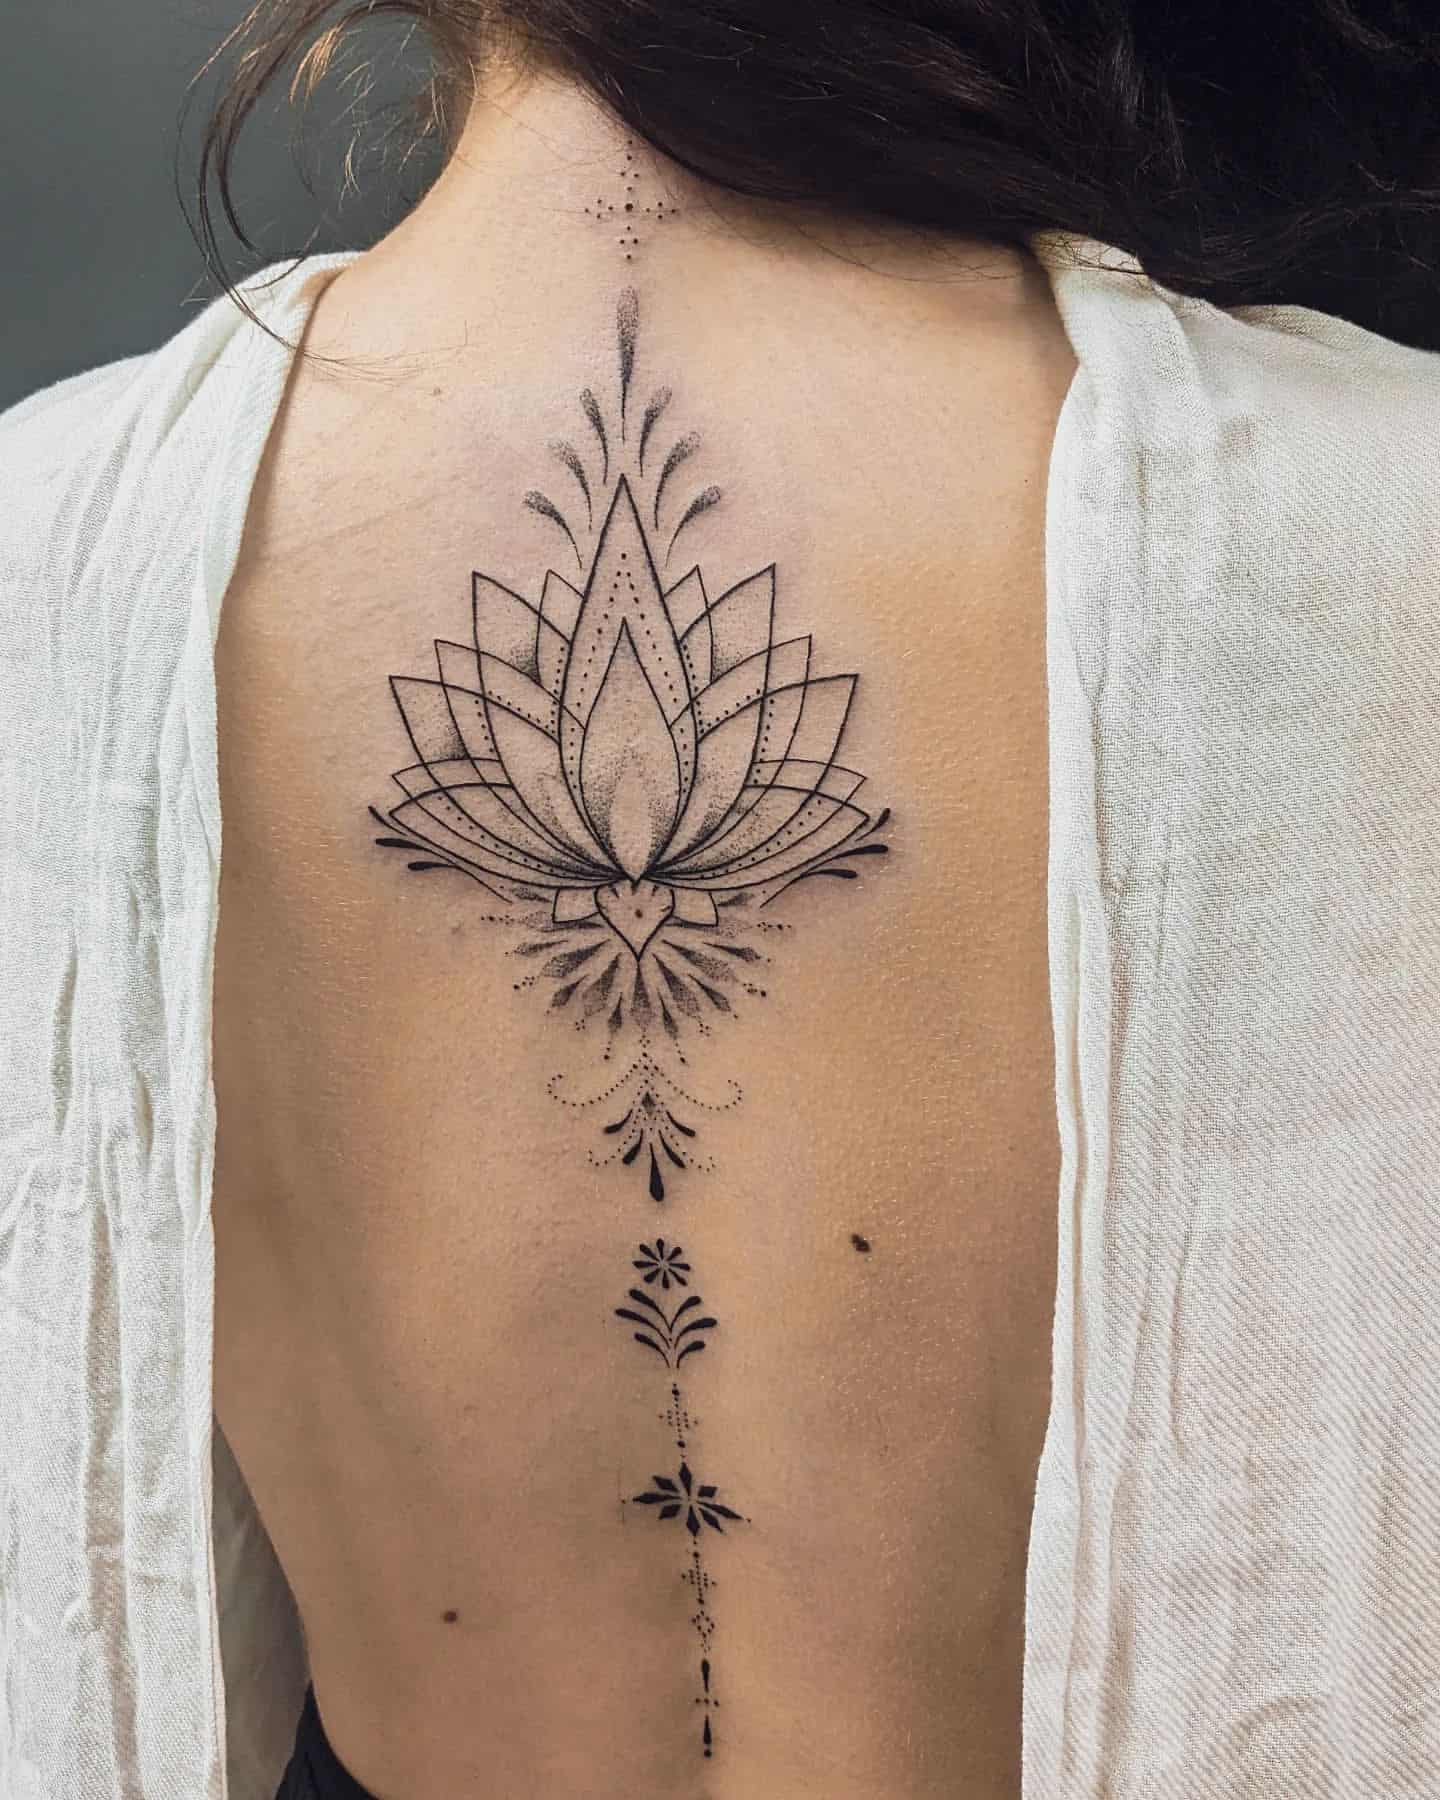 30 Awesome Spine Tattoo Ideas for Men & Women in 2023